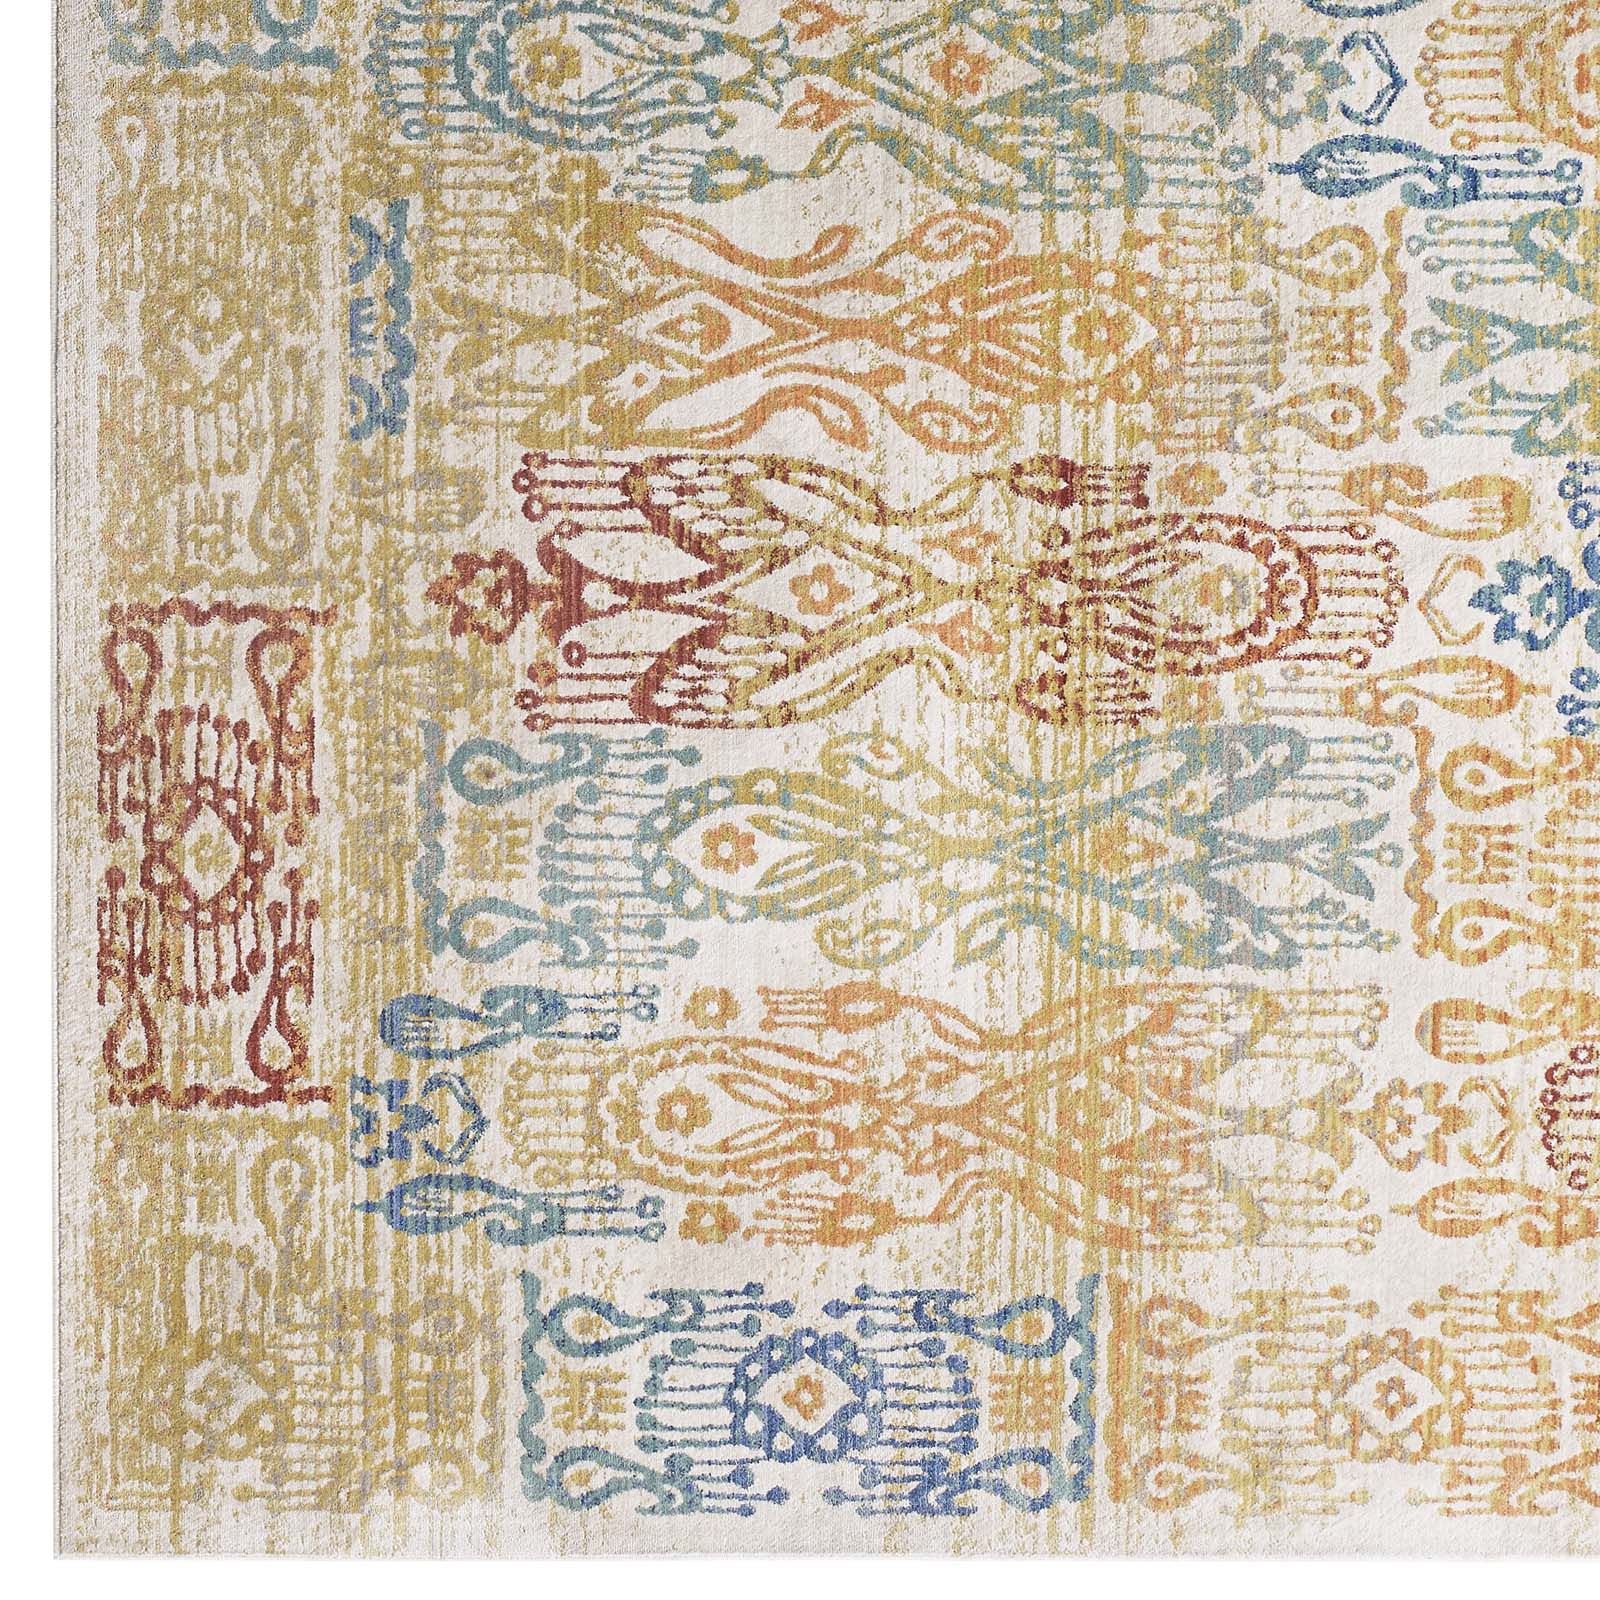 Modway Indoor Rugs - Solimar Distressed Southwestern Aztec 4x6 Area Rug Multicolored